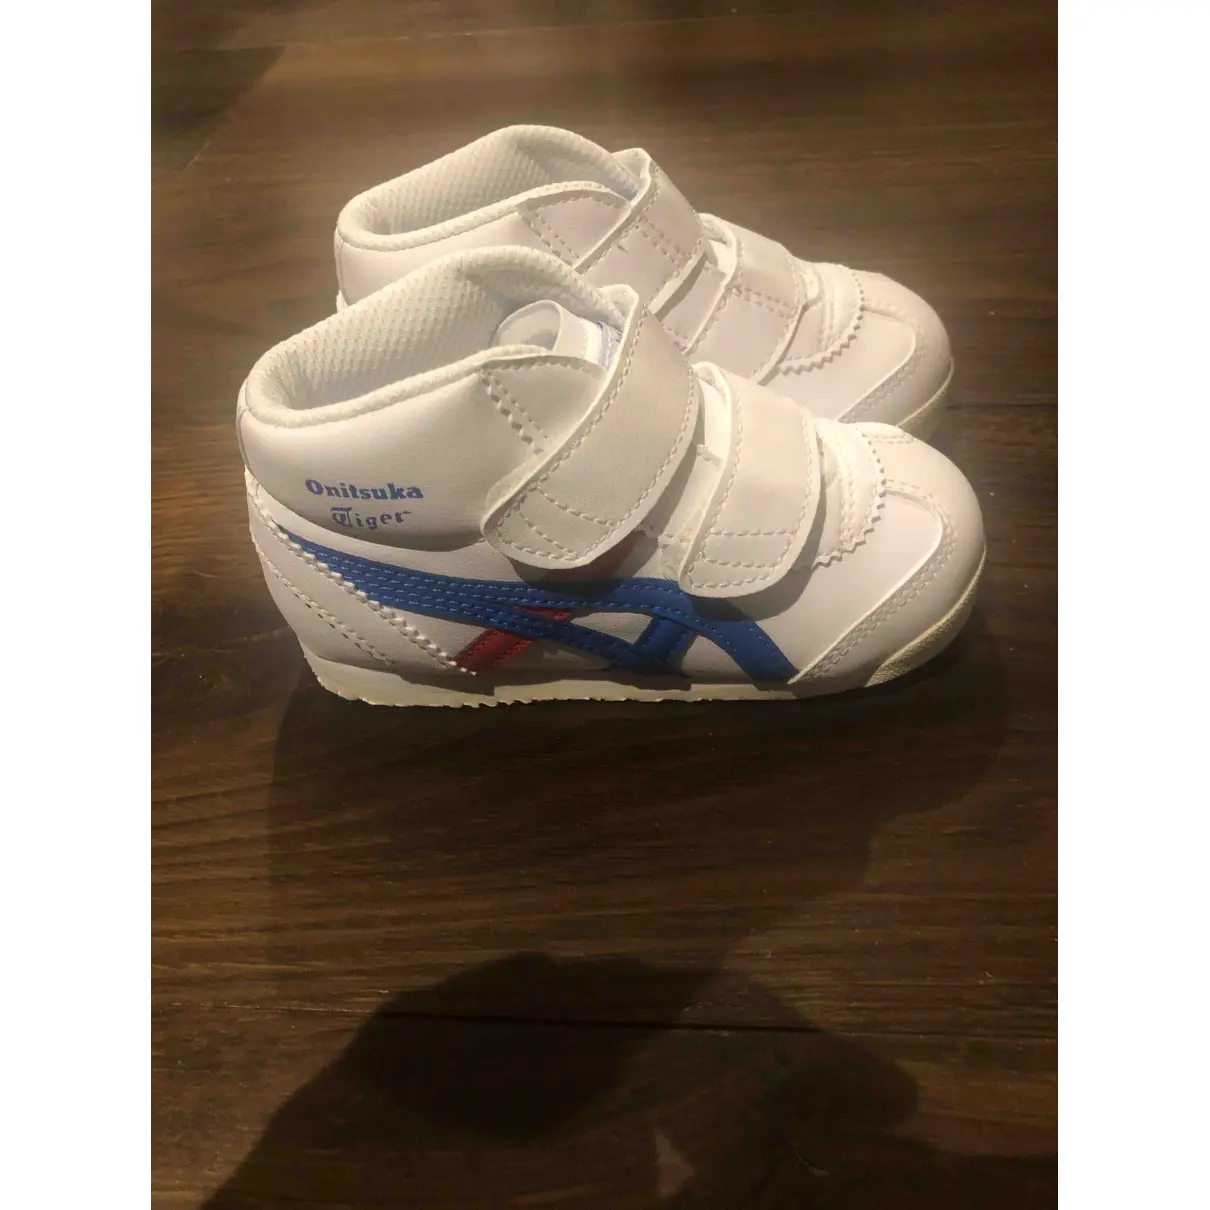 Buy Onitsuka Tiger Leather trainers online